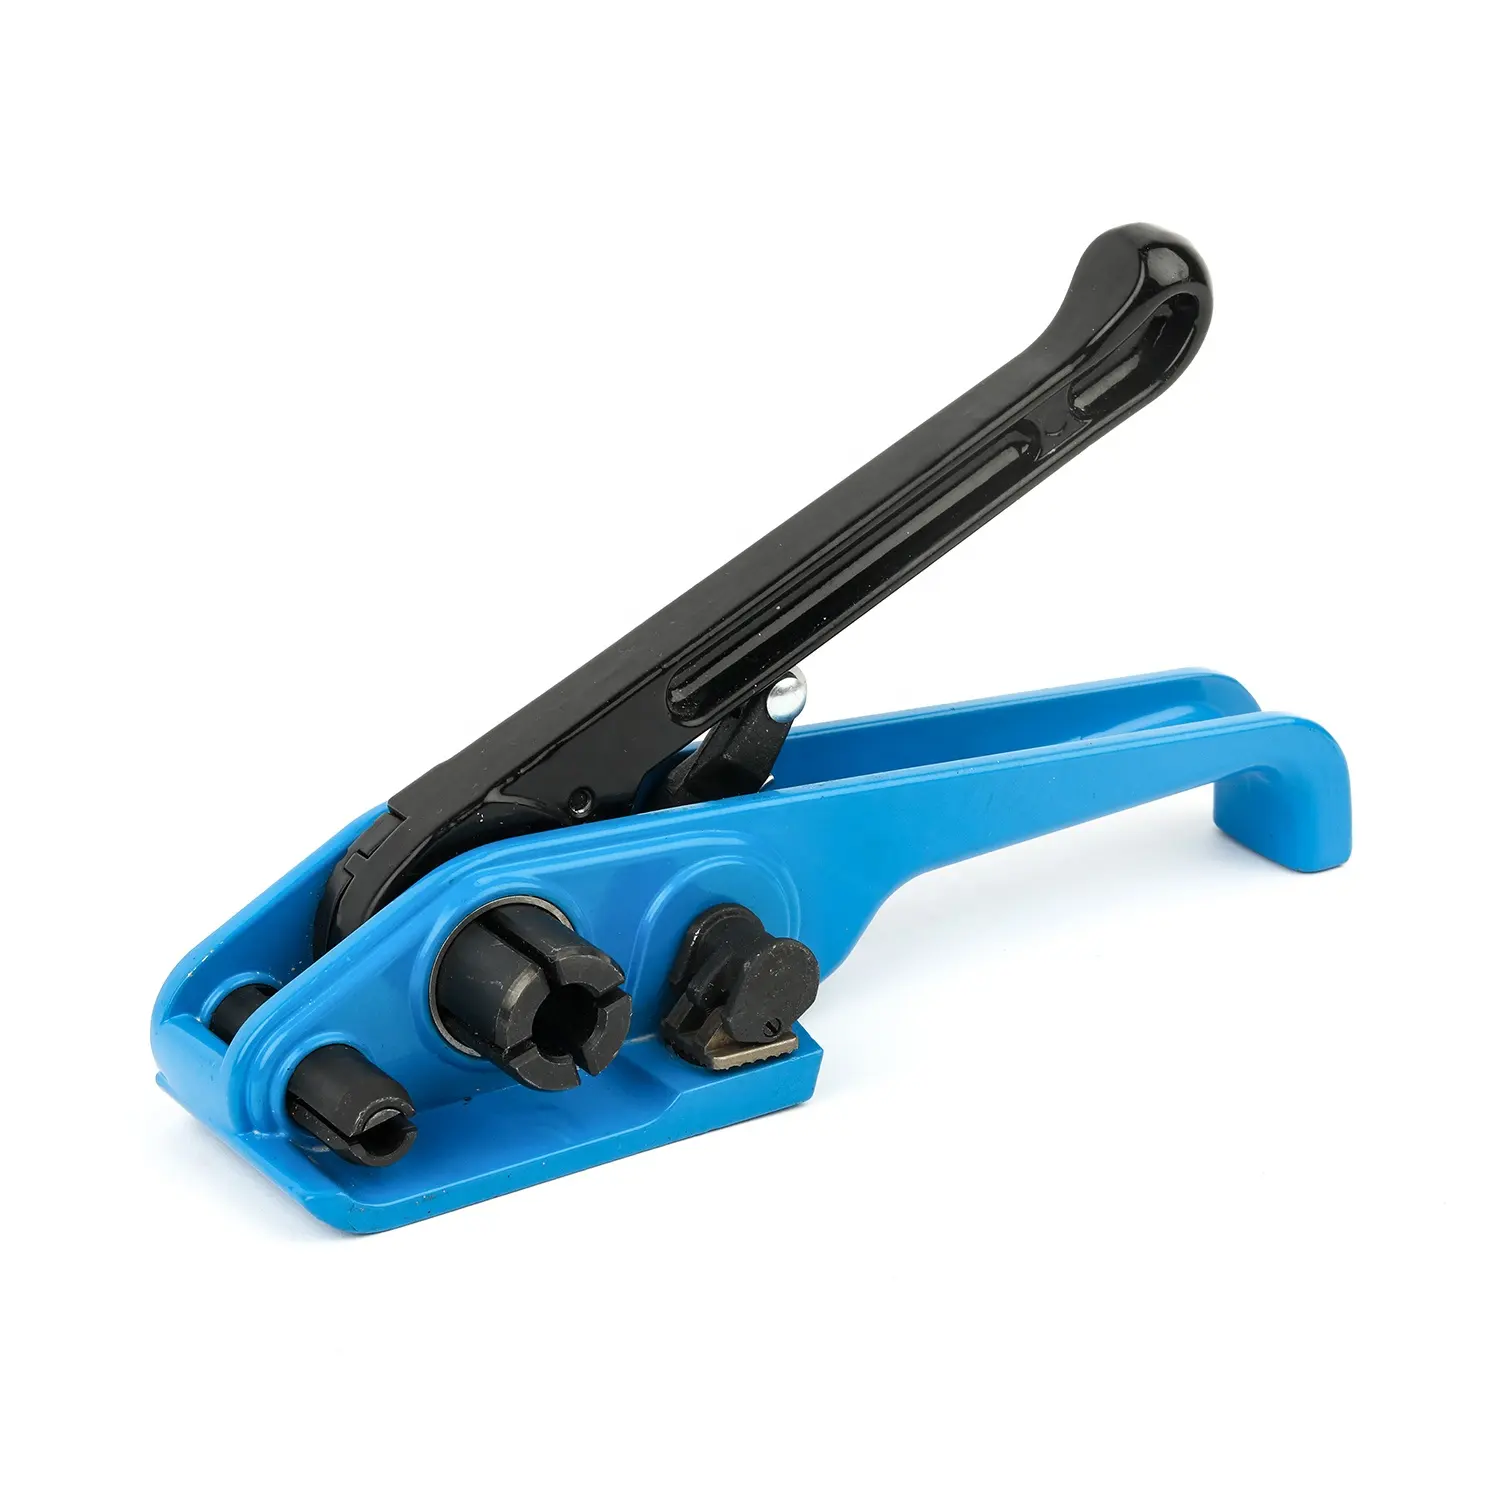 Blue Base and Black Handle Handheld PET Strapping Tool with Cutter Built Inside for Manual Strap Tension